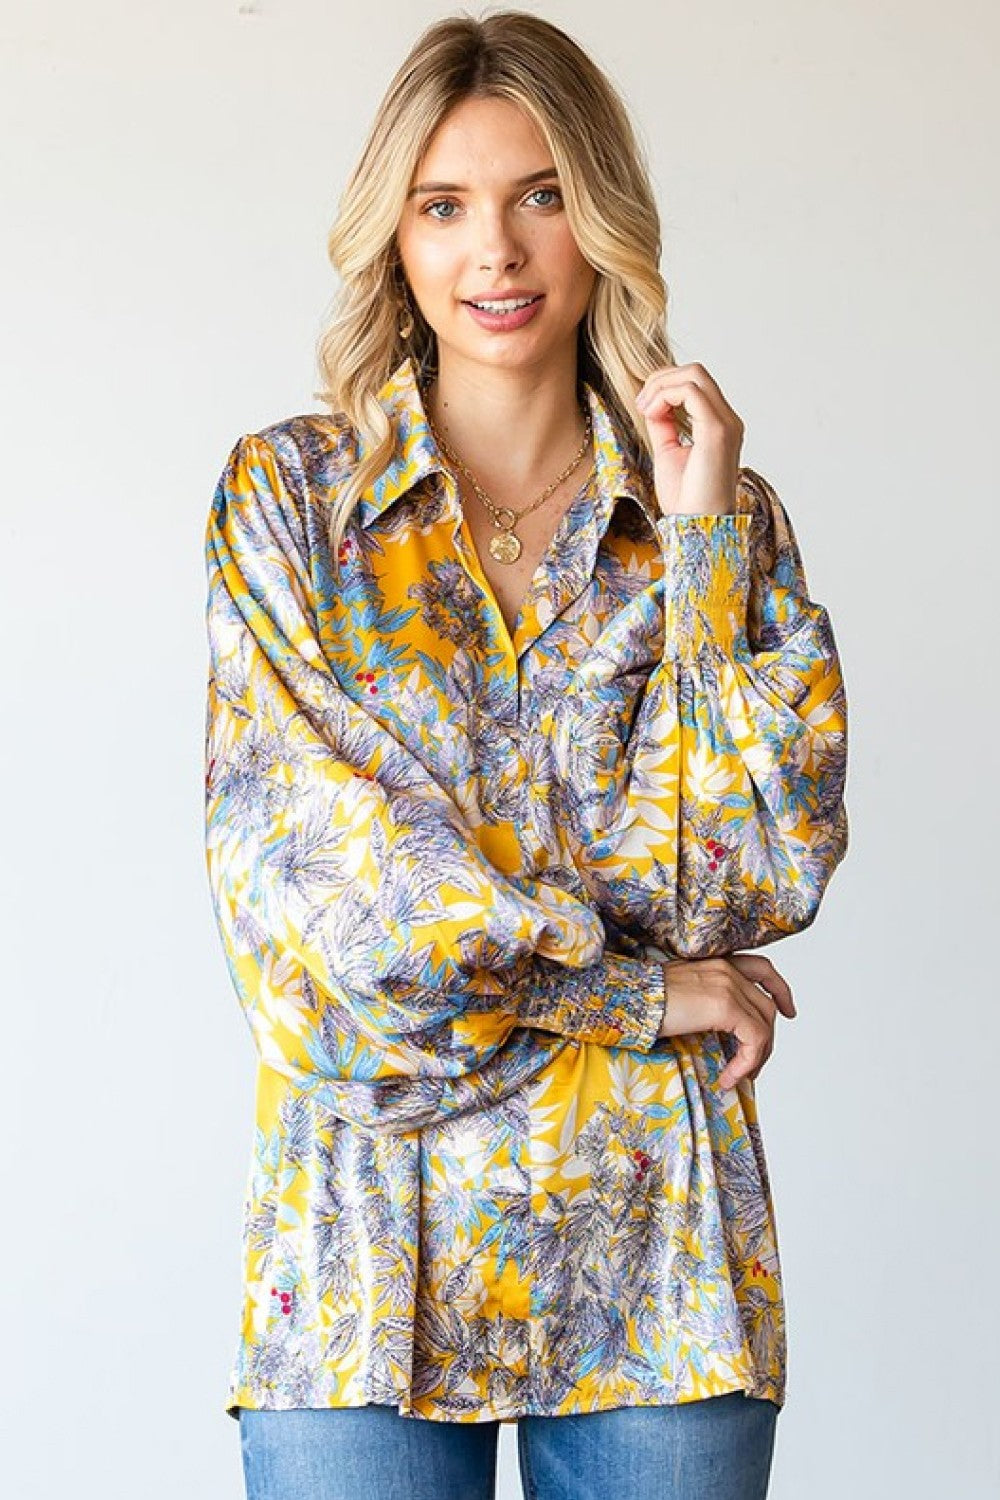 First Love Full Size Floral Lantern Sleeve Blouse - Women’s Clothing & Accessories - Shirts & Tops - 4 - 2024